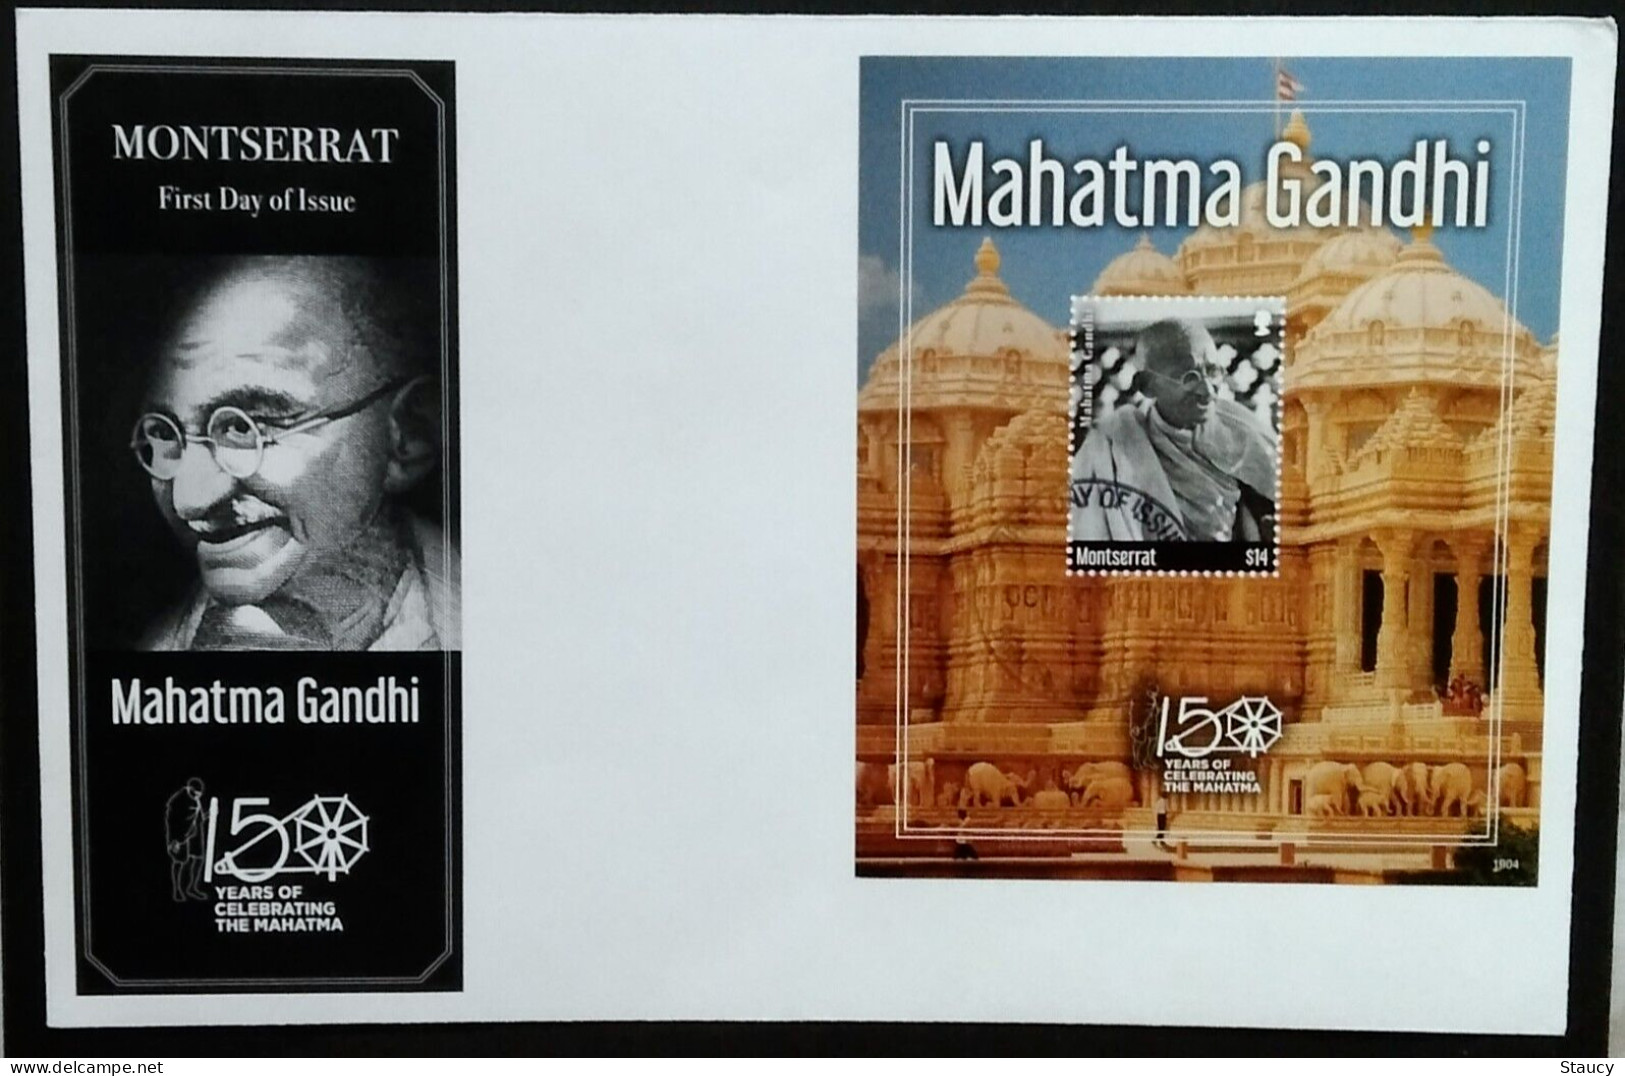 Montserrat 2019 - 150th Anni Mahatma Gandhi - Collection 2 FDCs + 2 perf / 2 imperf Sheets + 5 Die Cards + 2 Regd.Covers